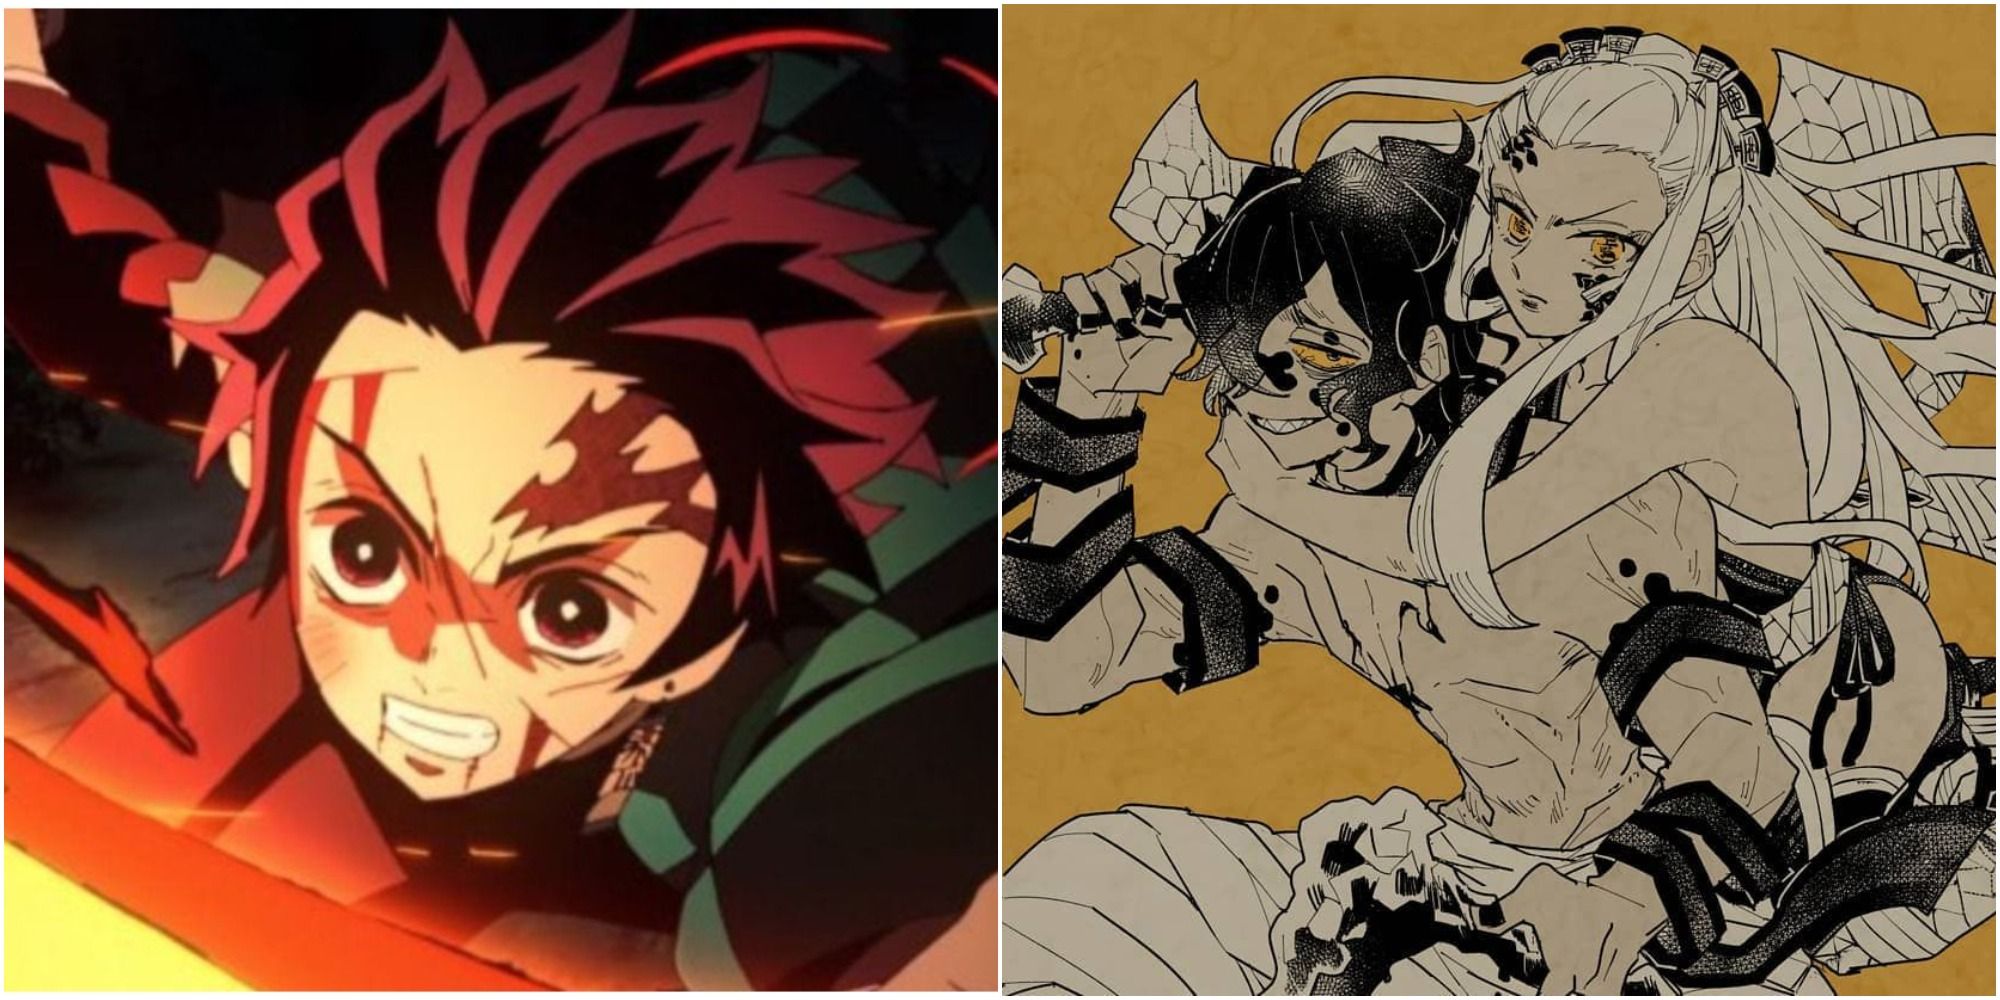 What you need to know about Demon Slayer Season 2